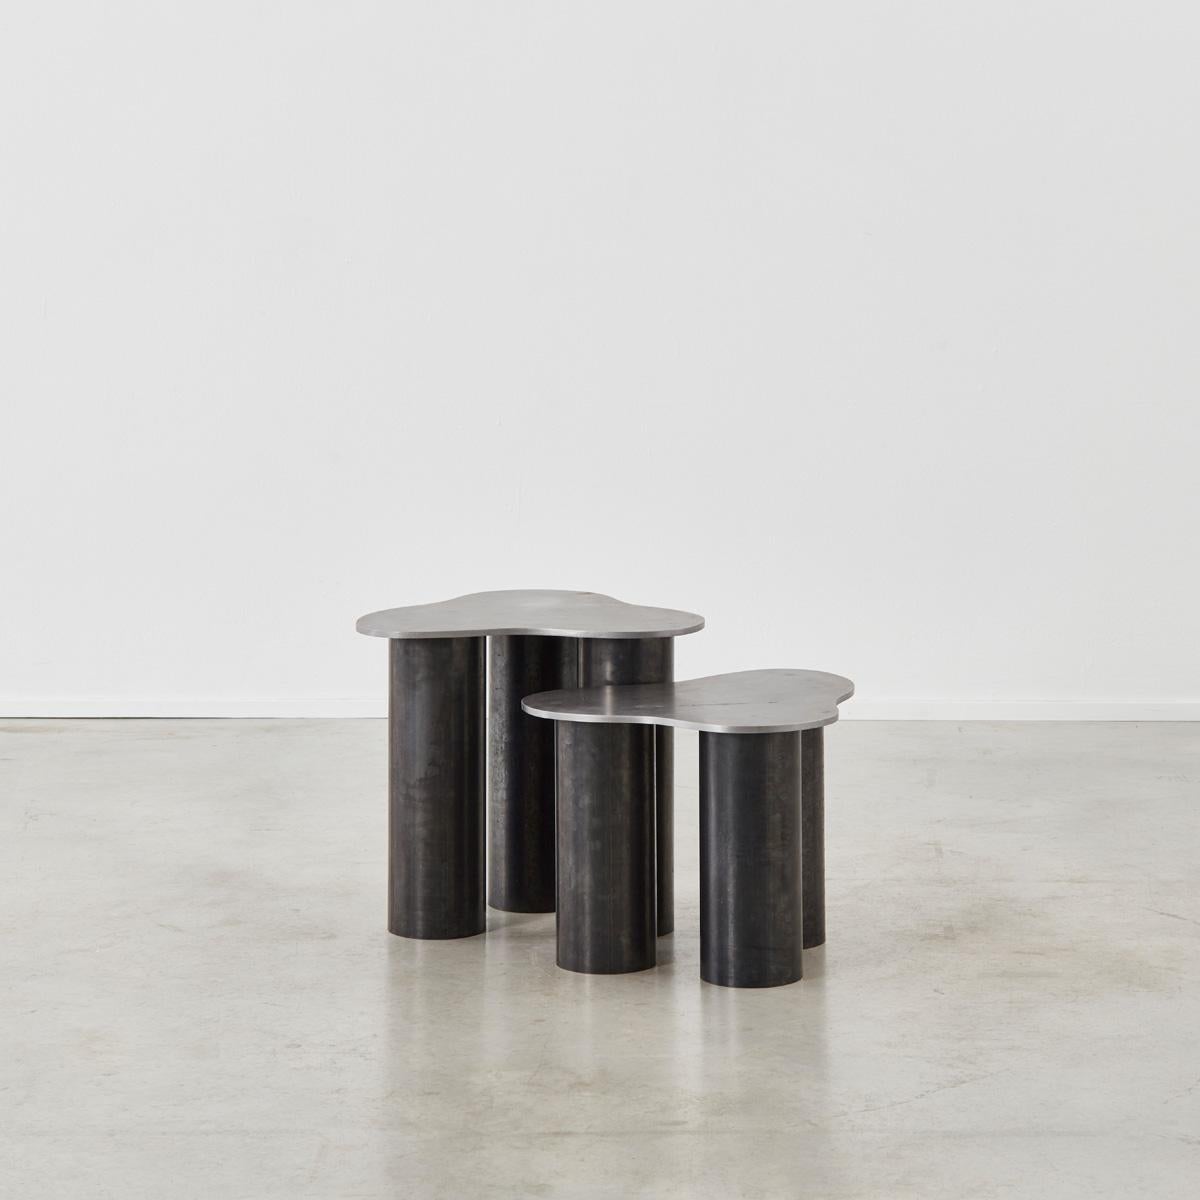 Side table 001 is a made to order design by Archive for Space, a multidisciplinary design practice founded in London in 2019. Side table 001 was designed to celebrate raw steel through exploring the material’s cyclical nature. Made from standard